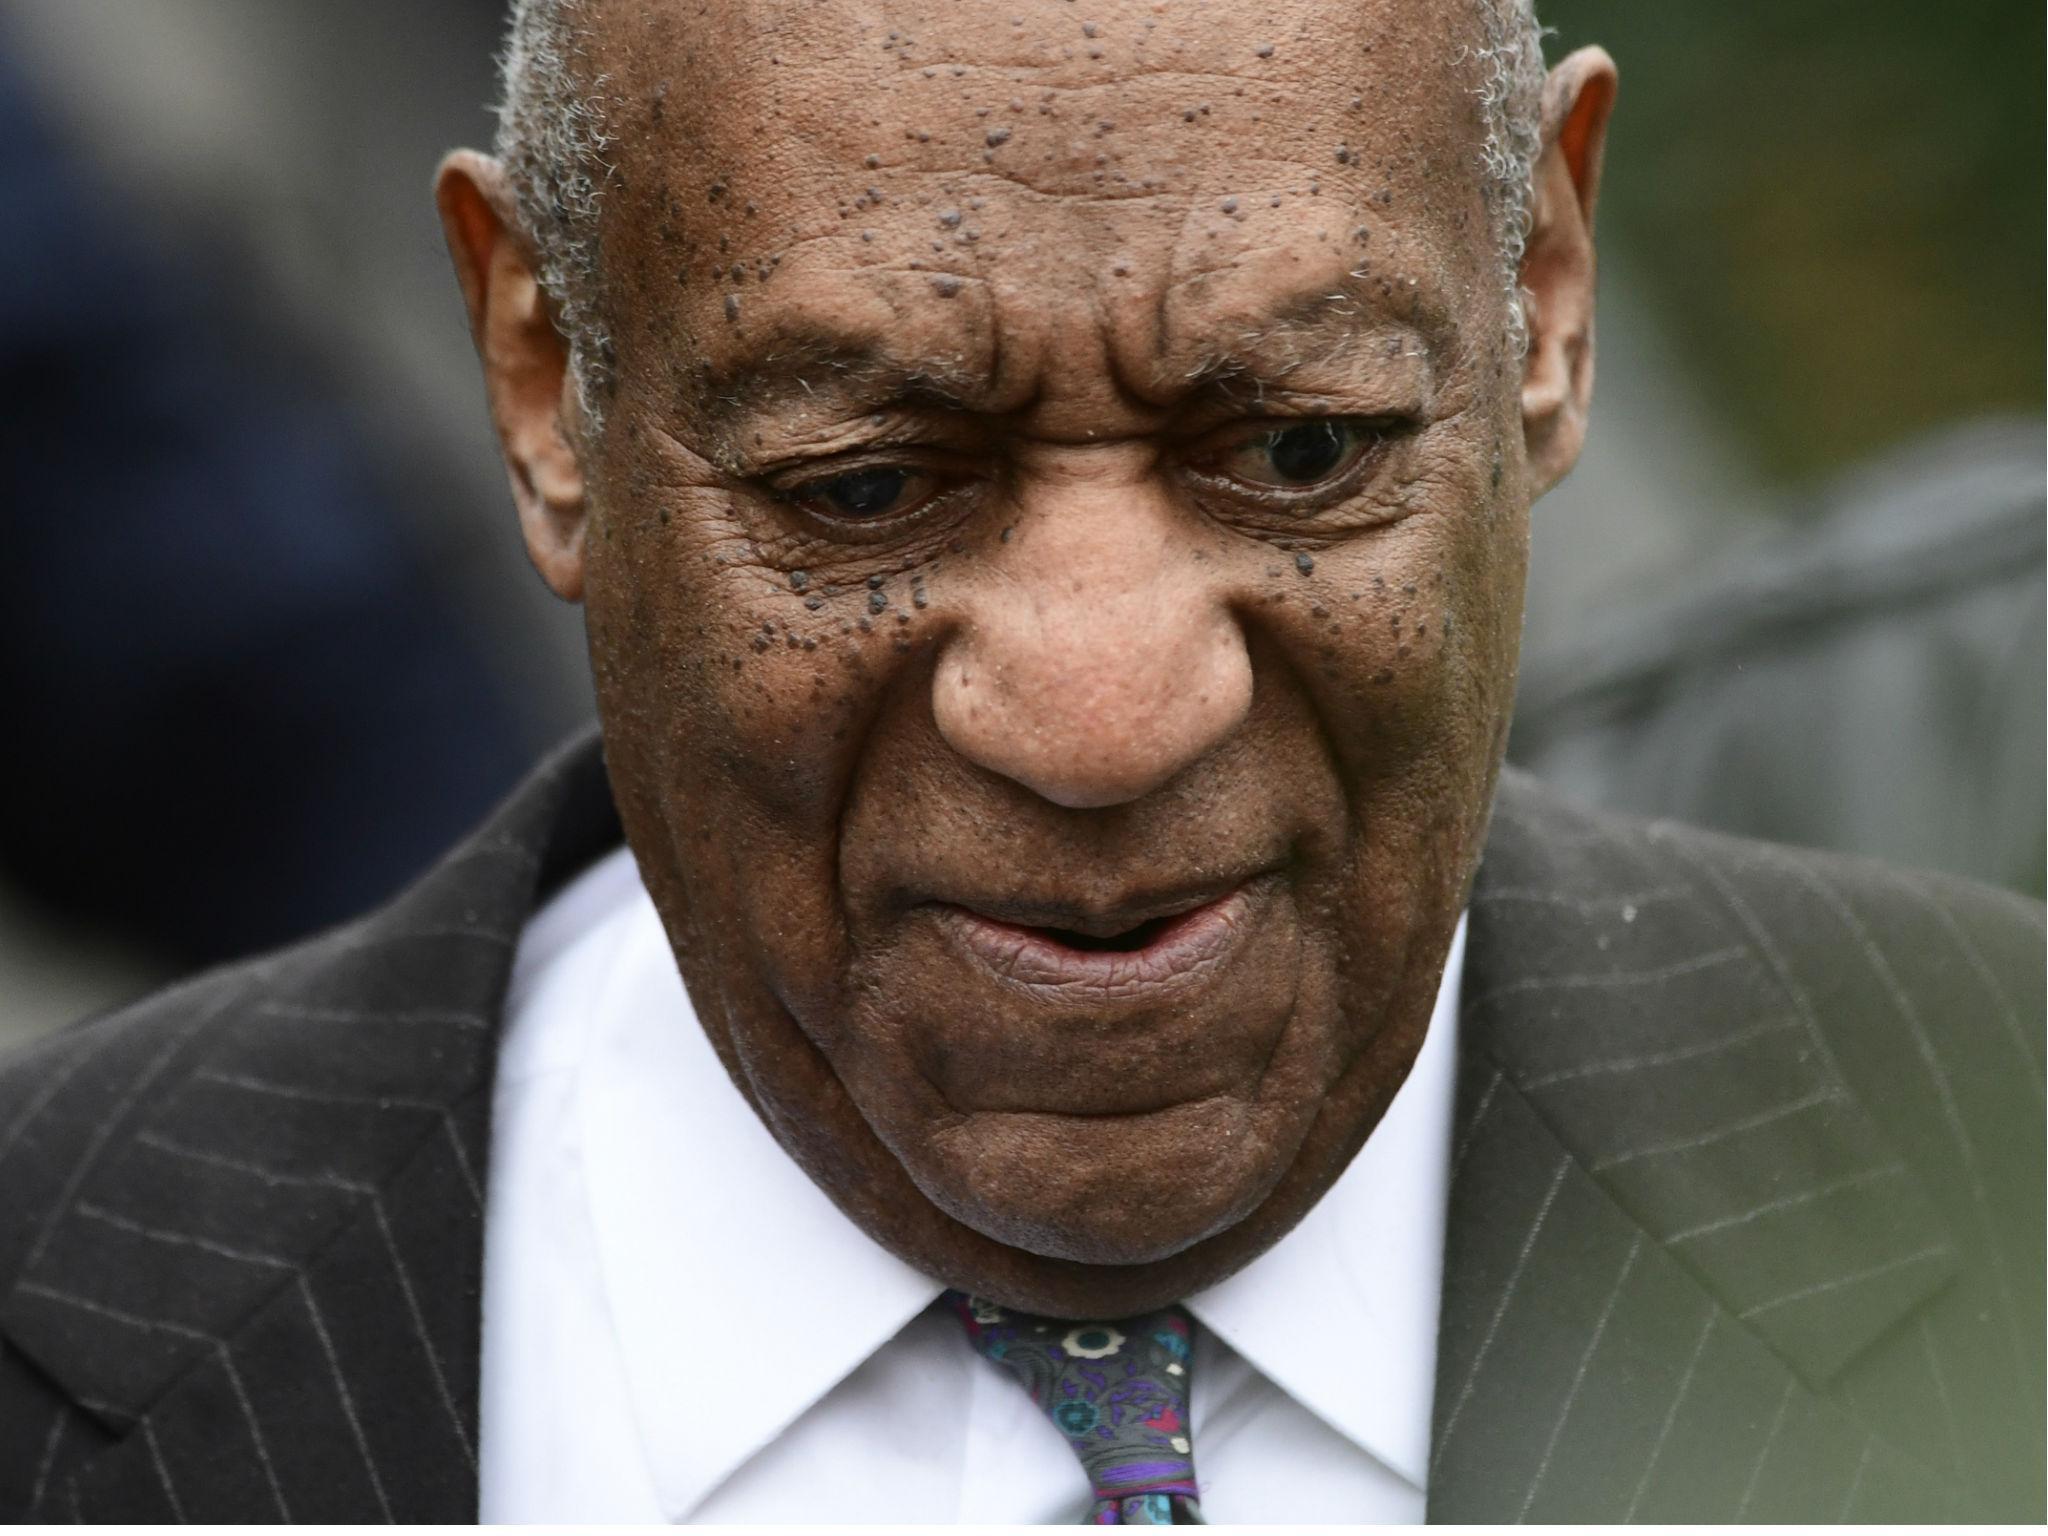 Mr Cosby arriving for his retrial in Pennsylvania